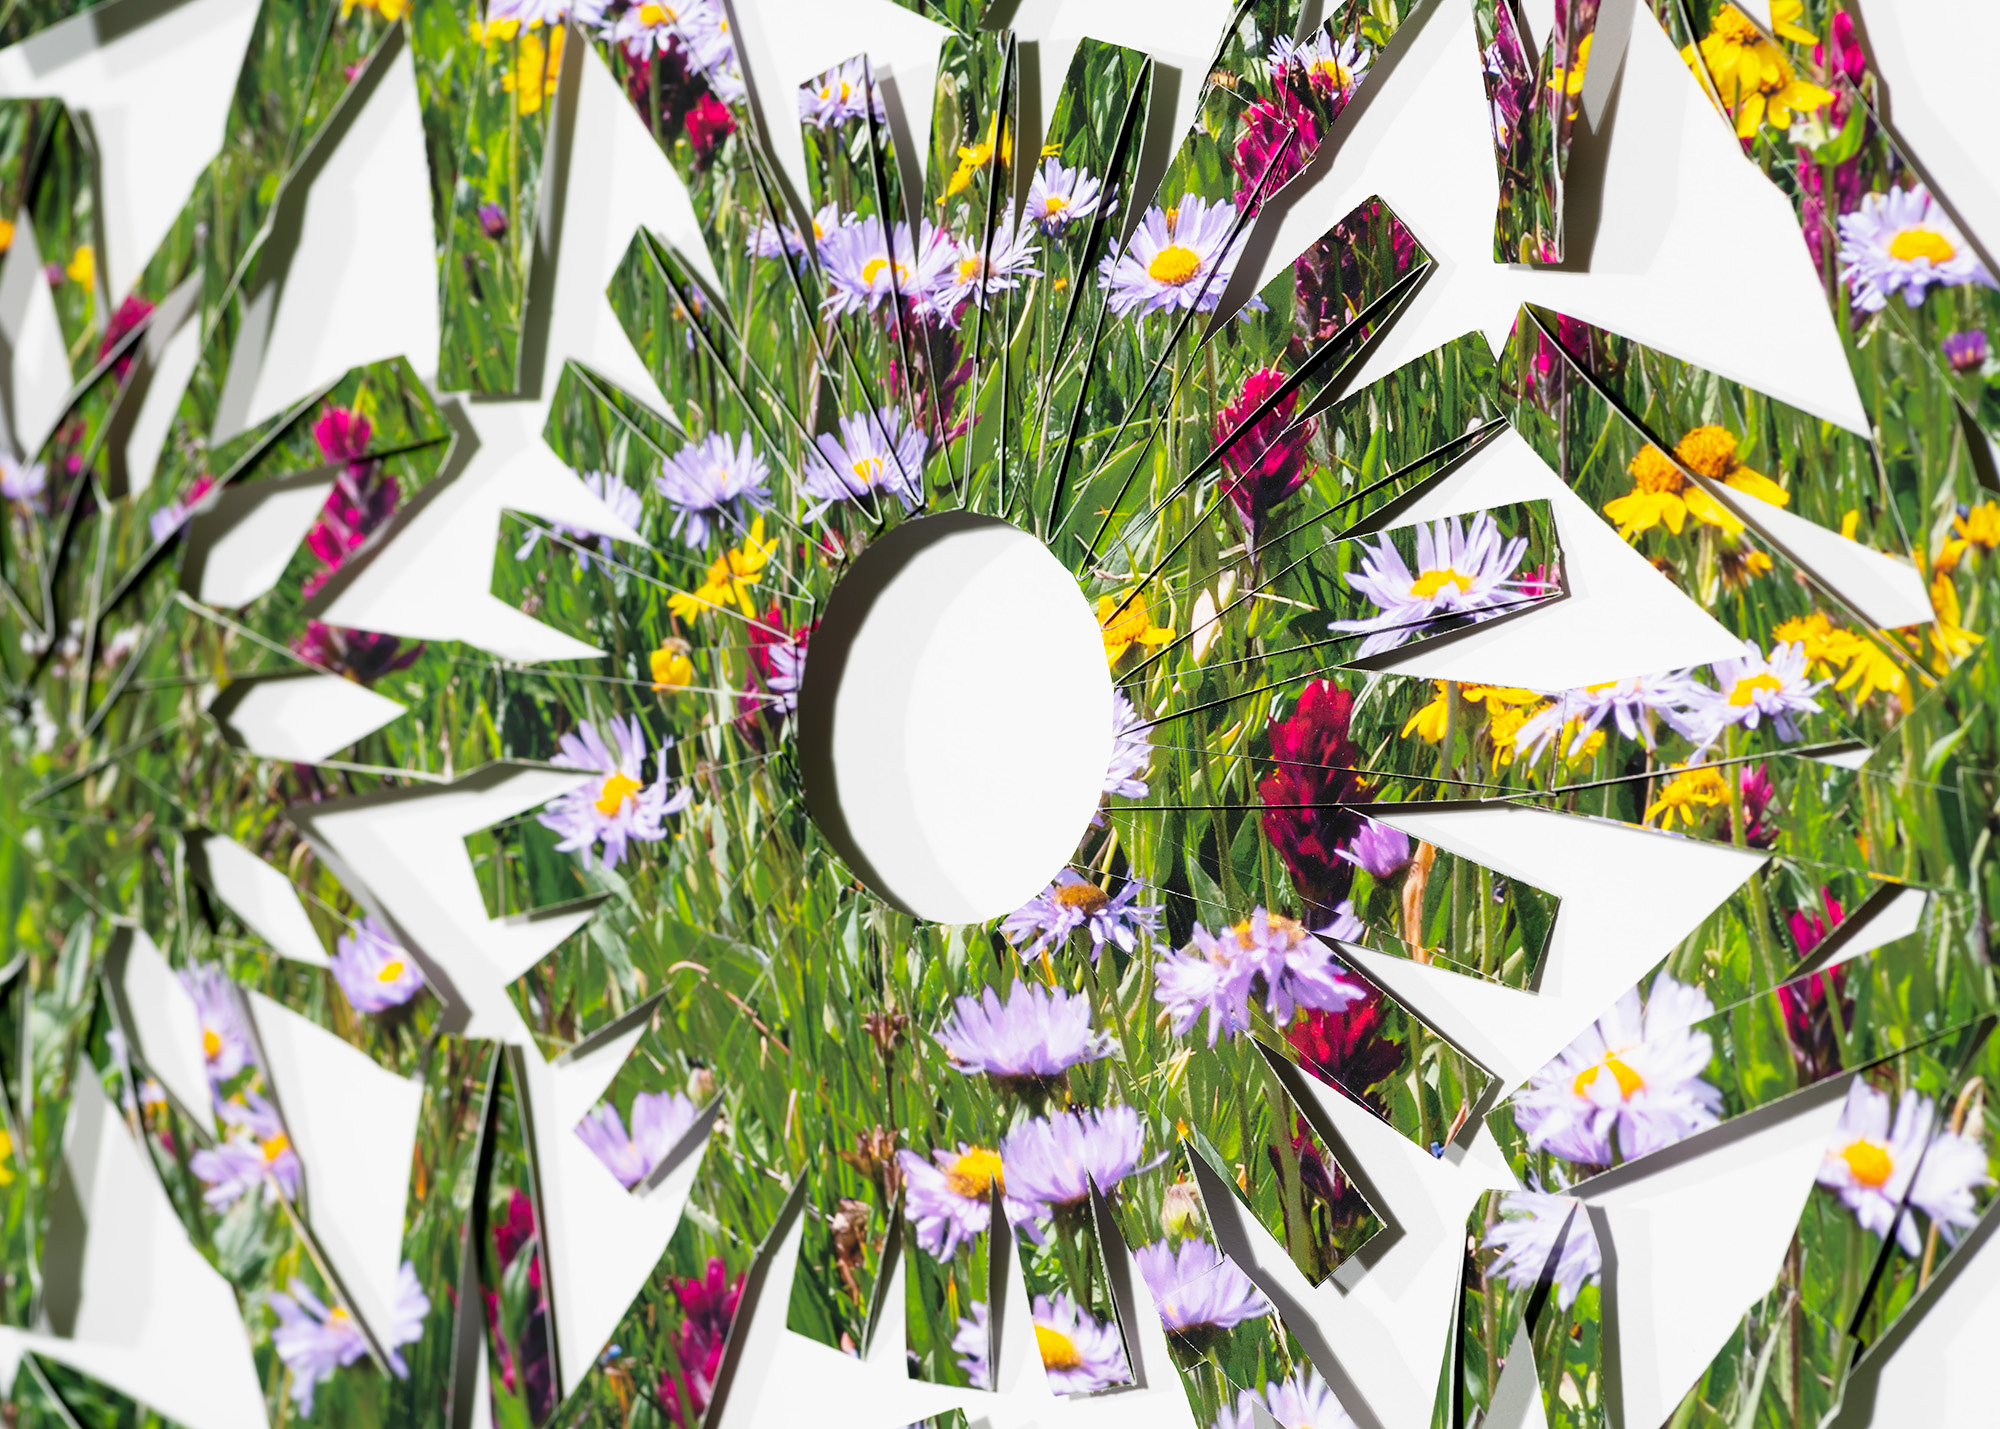 Detail of a folded Photographic net of alpine wildflower field featuring Arnica, Aster, and Castilleja flowers. The photograph has been printed, folded, and knit into the form of a net. The pattern of the net reflects the petal pattern of the flowers in the original image.